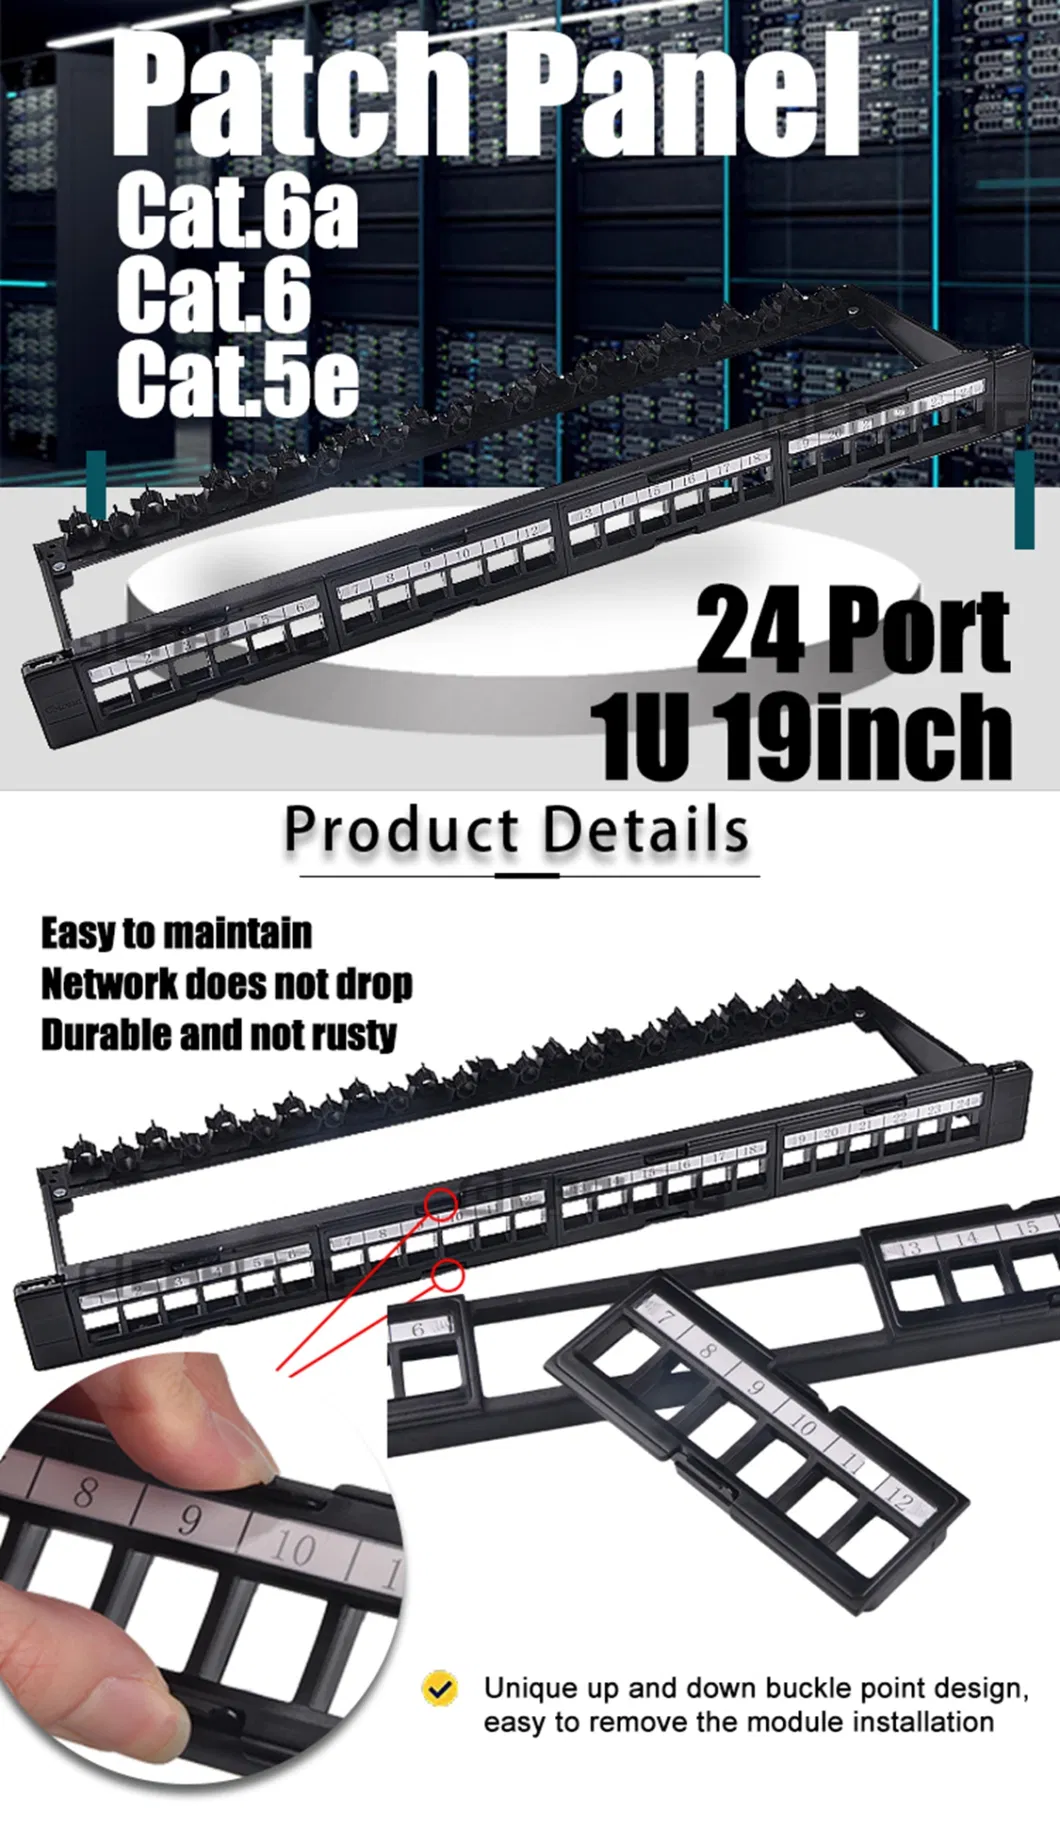 Gcabling High Quality Unloaded Patch Panel for Cat5e/CAT6/CAT6A